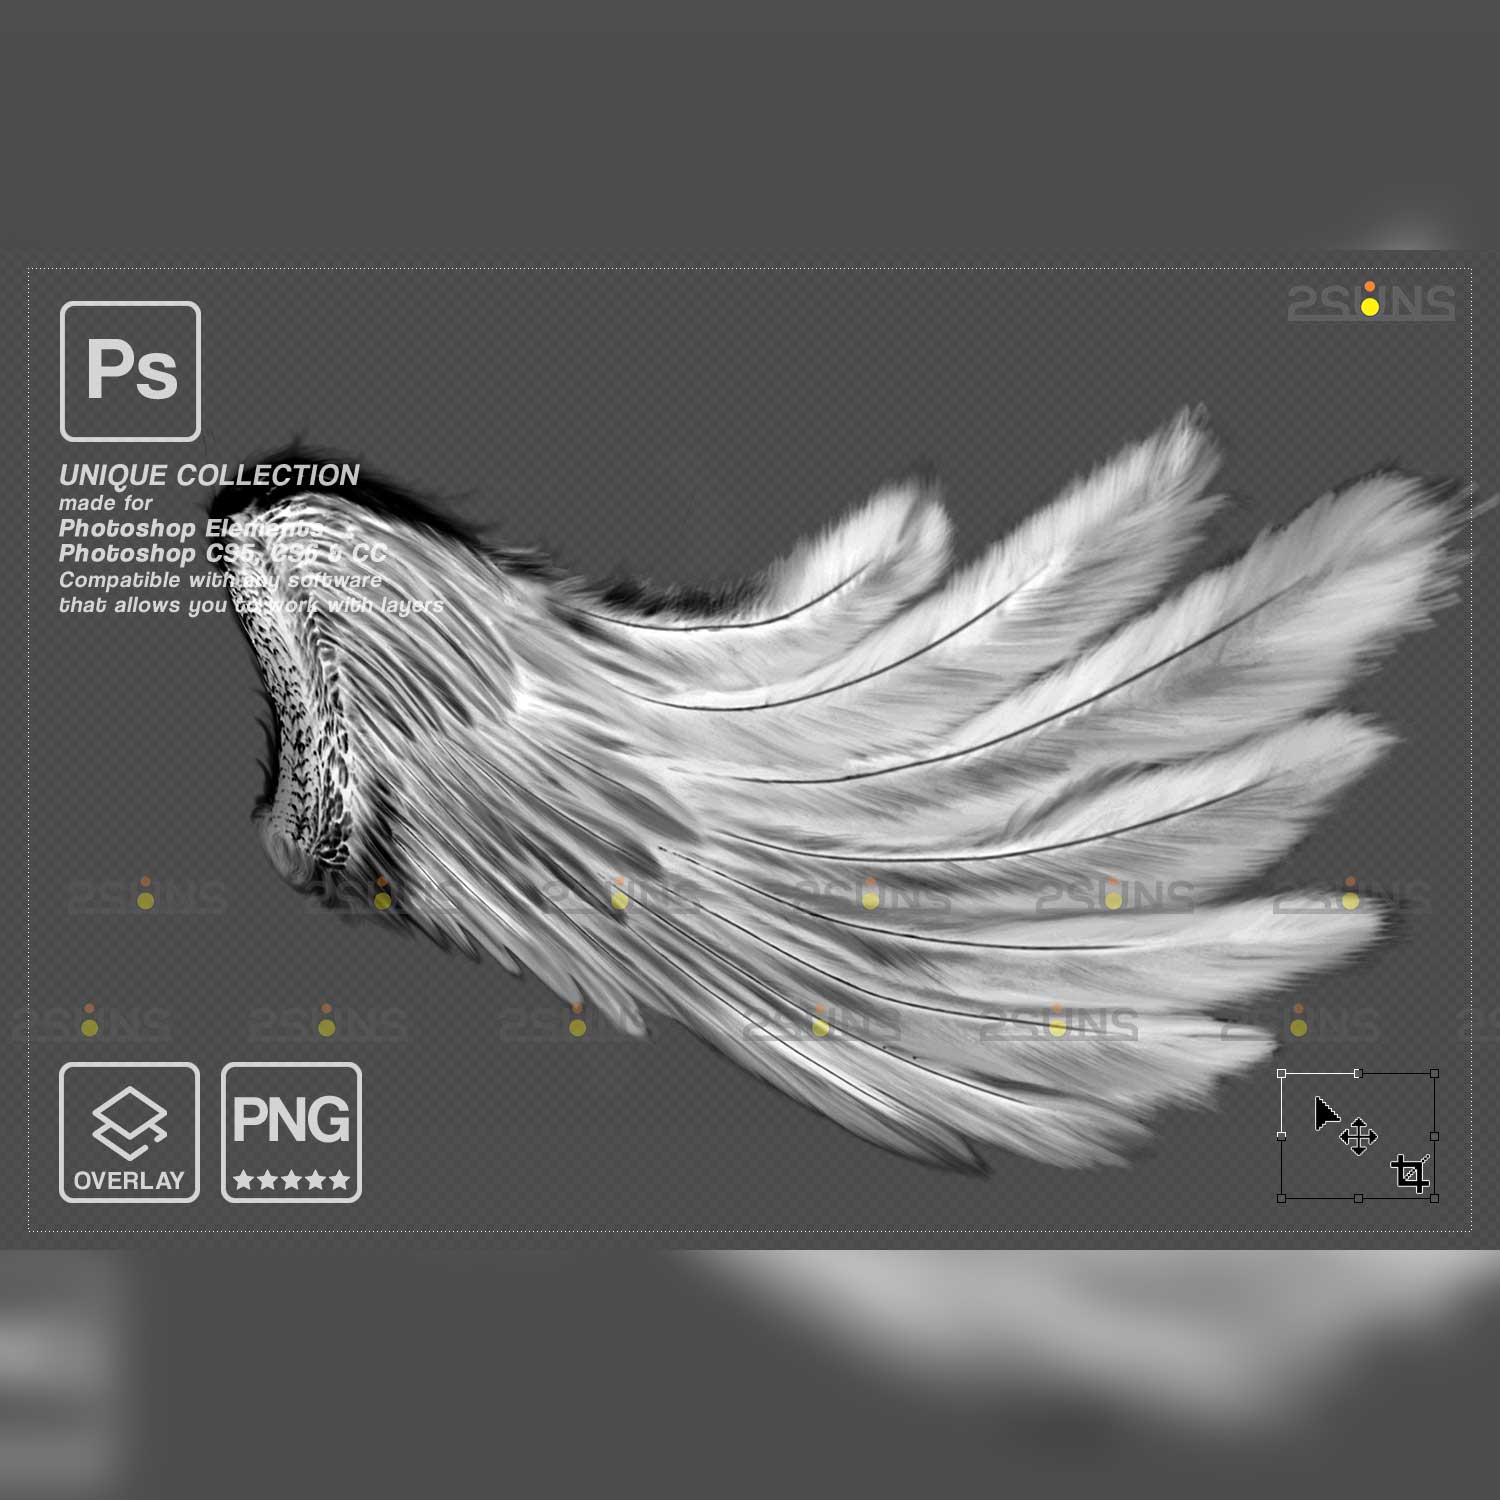 Realistic White Angel Wings Photoshop Overlays Raven Wing.